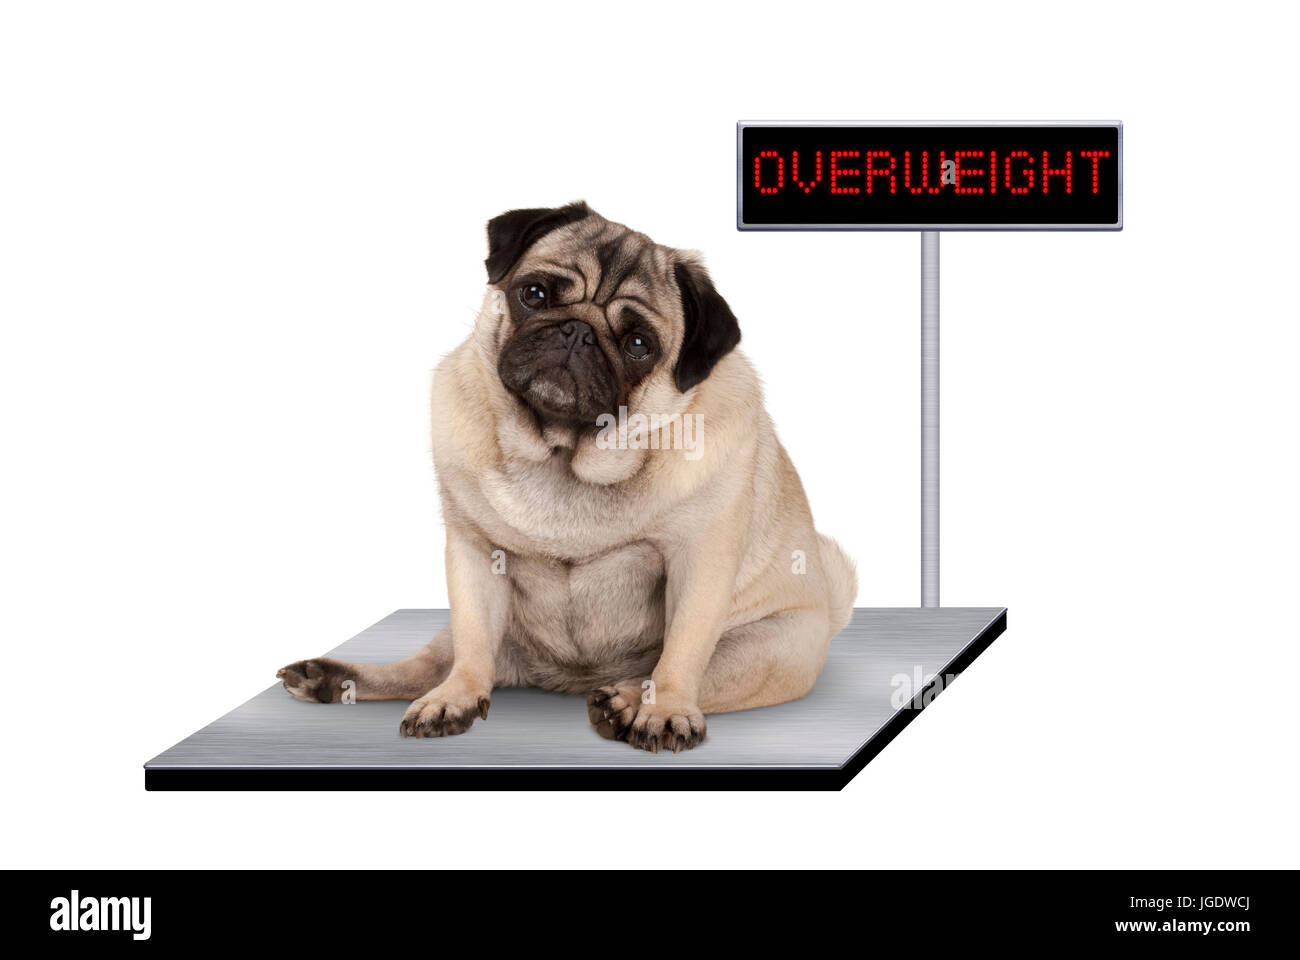 heavy fat pug puppy dog sitting down on vet scale with overweight LED sign, isolated on white background Stock Photo